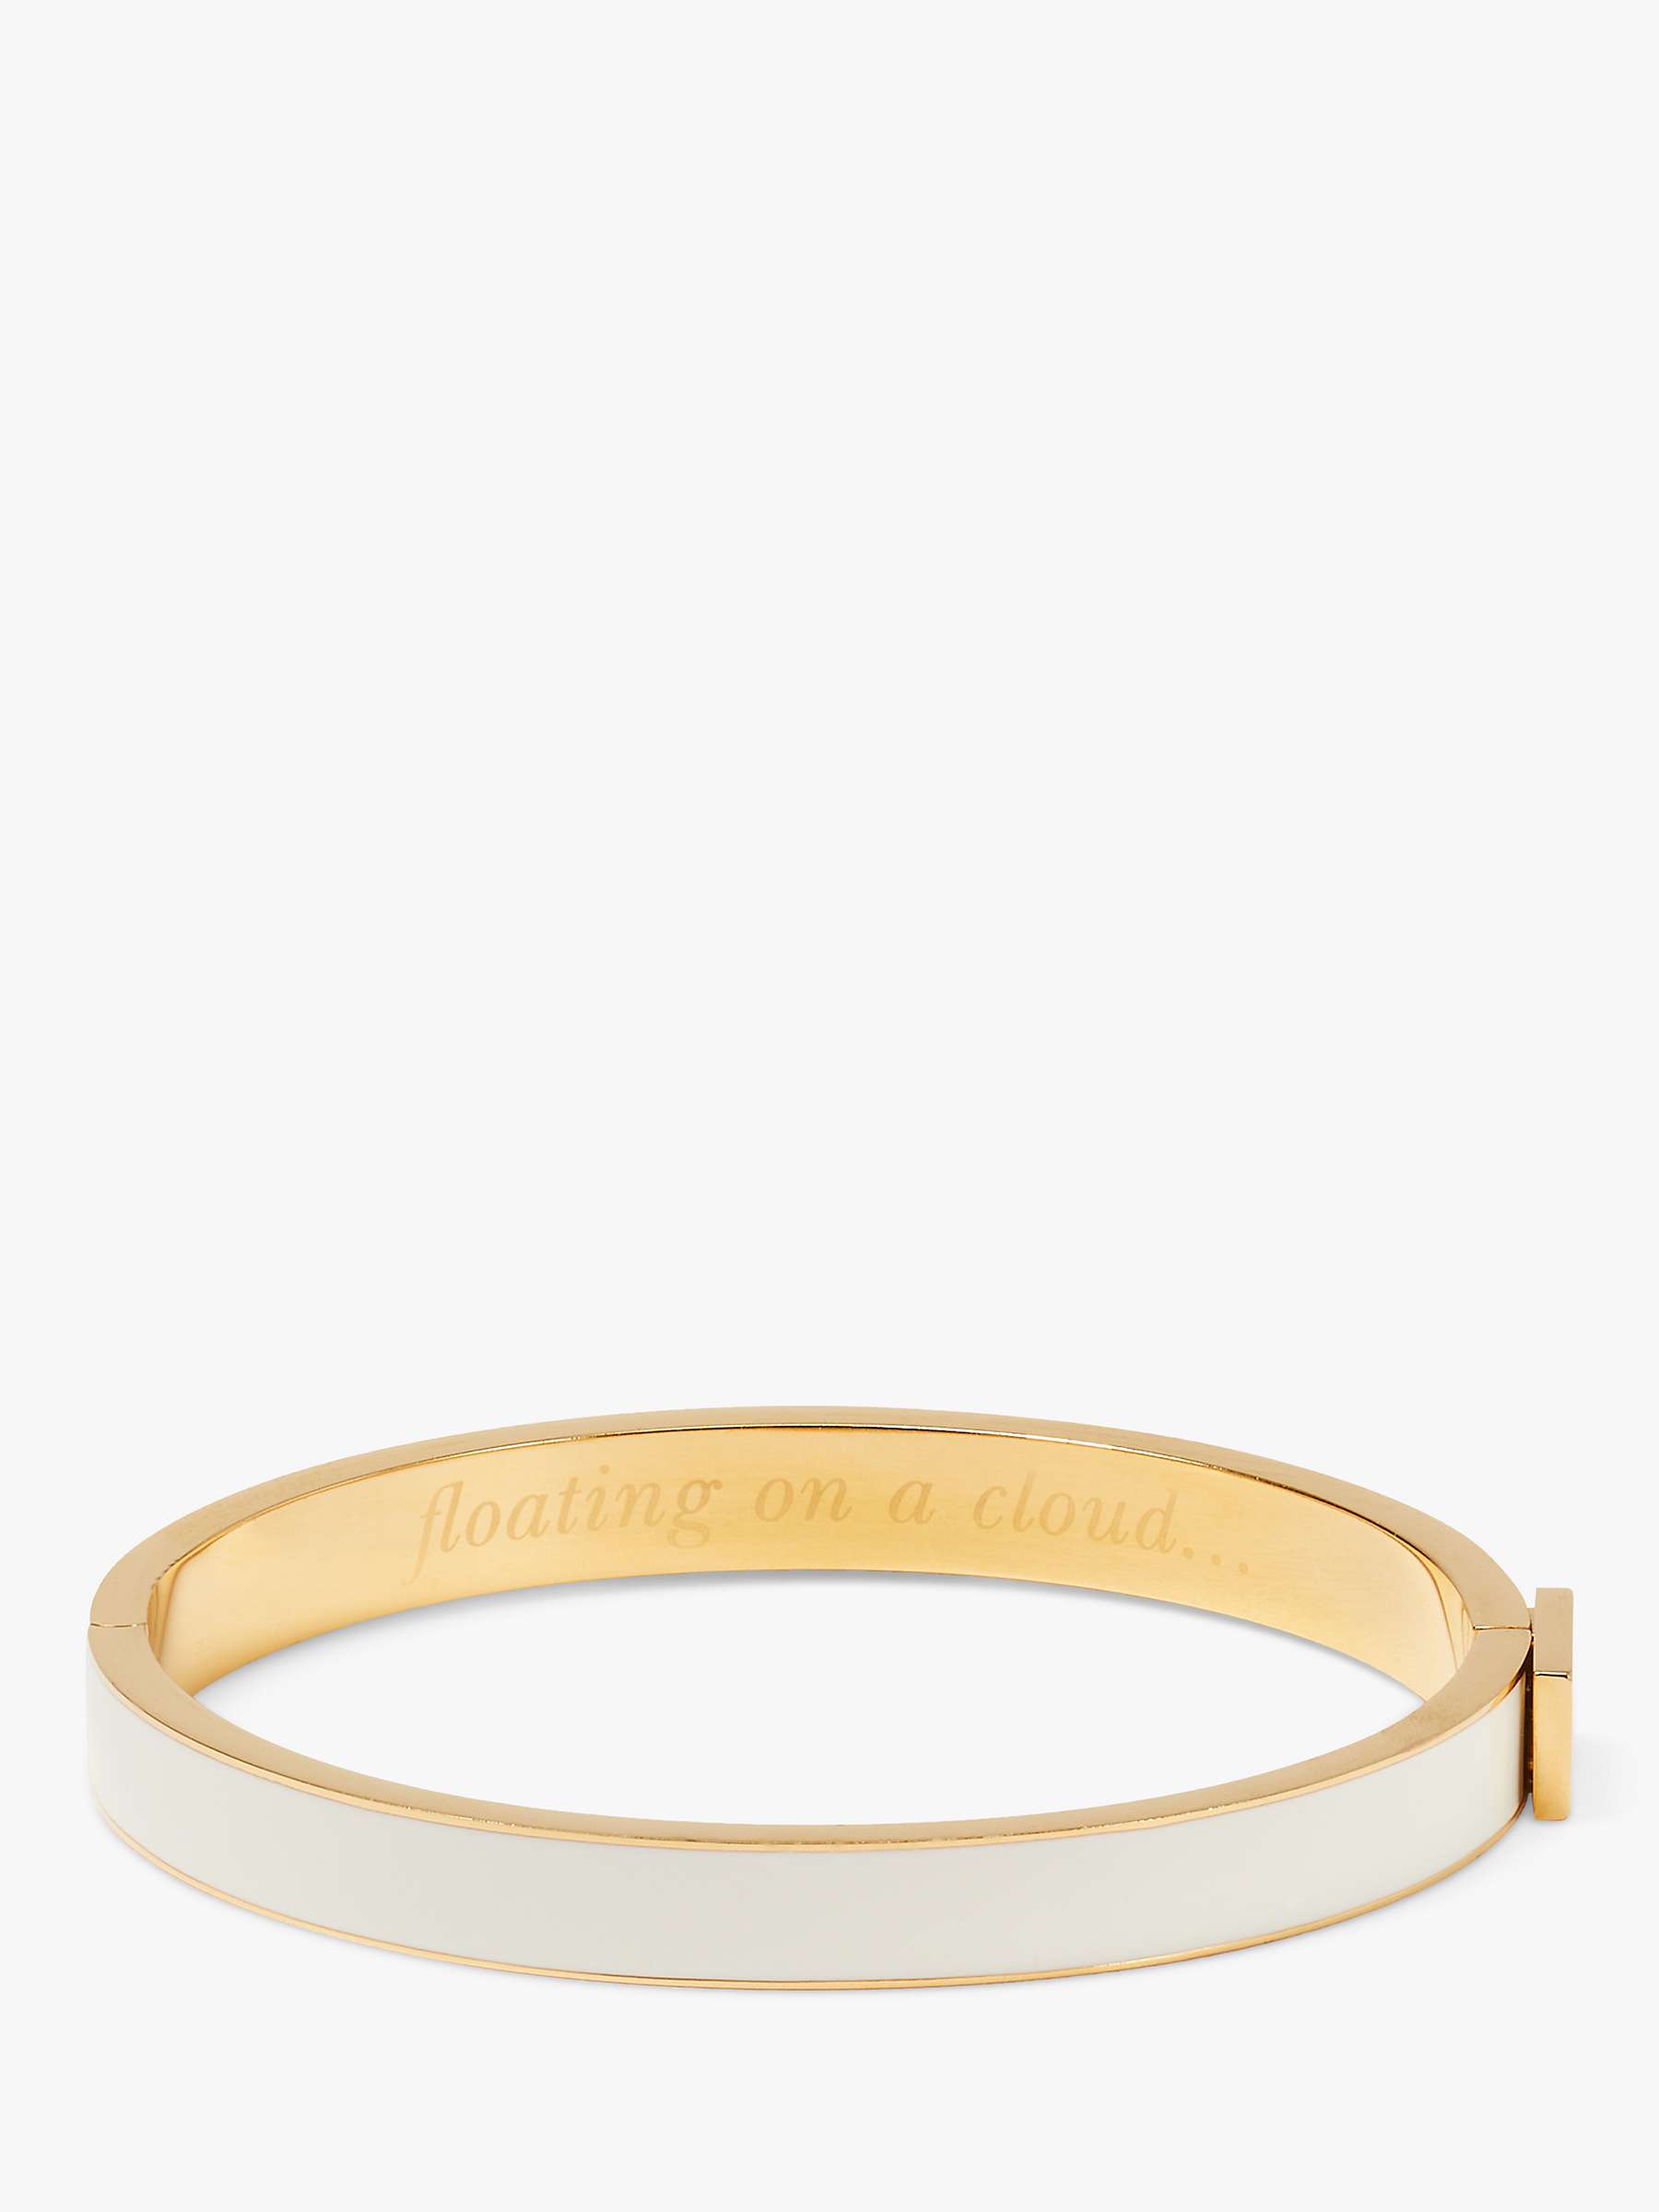 kate spade new york Floating On A Cloud Bangle, White/Gold at John ...